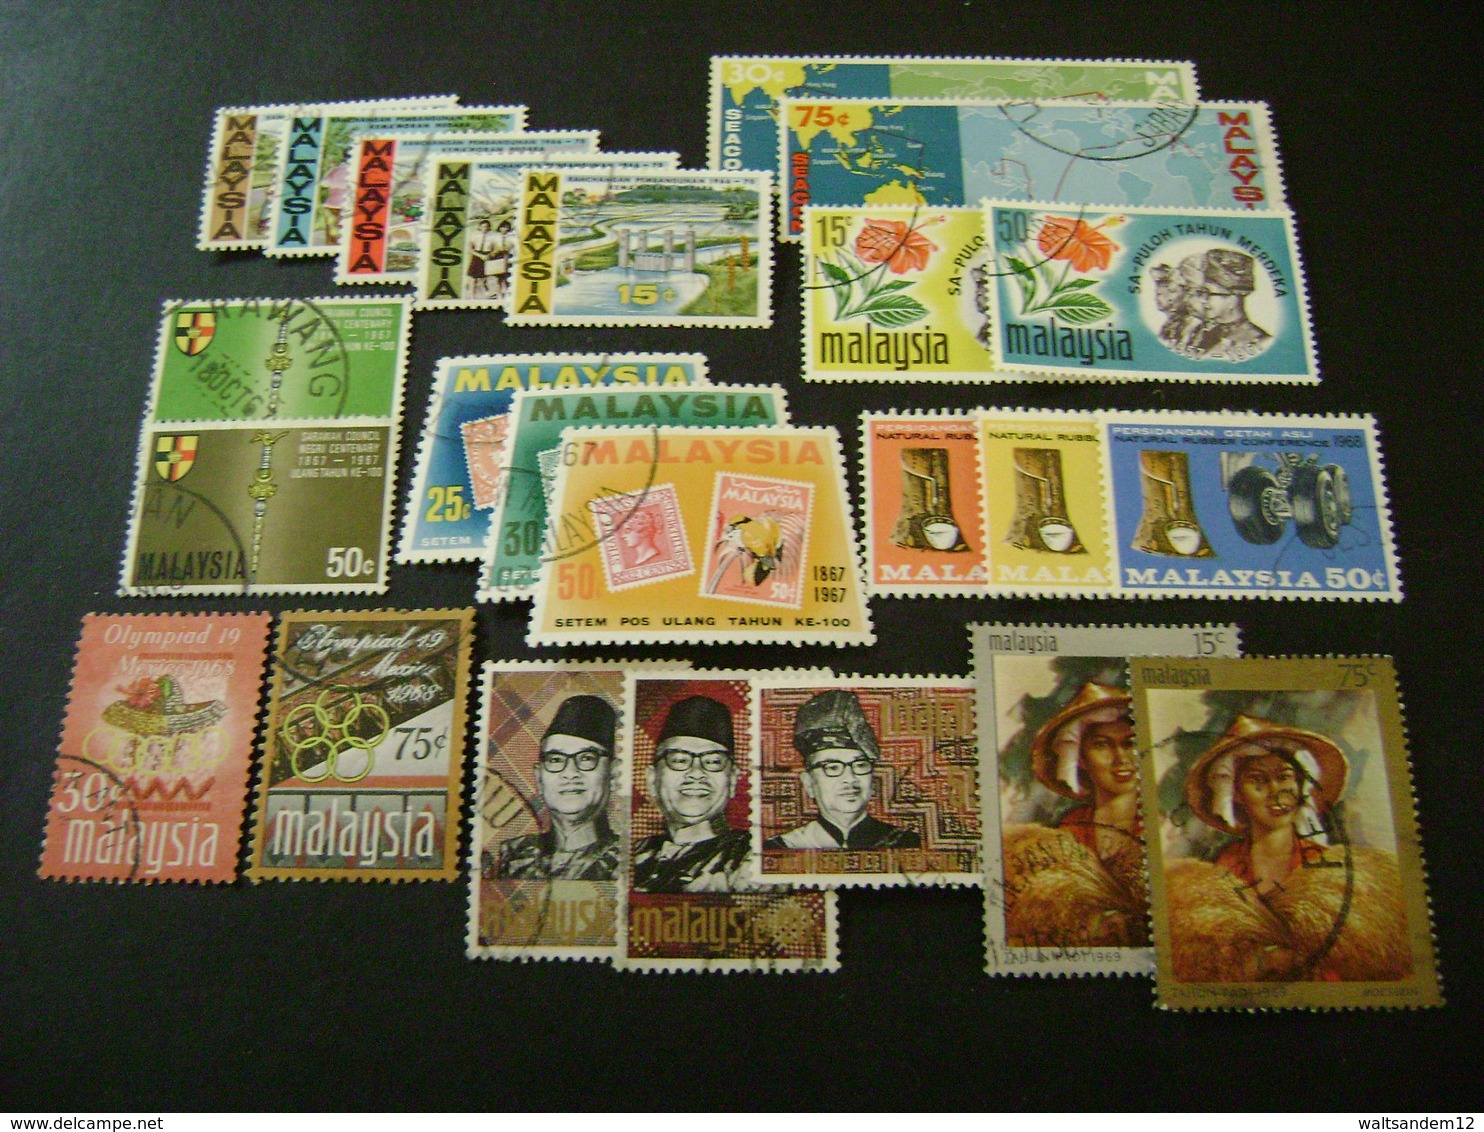 Malaysia 1963-1969 Complete Stamp Issues (SG 1-5, 7-60) 2 Images - Used [Sale Price] - Malaysia (1964-...)